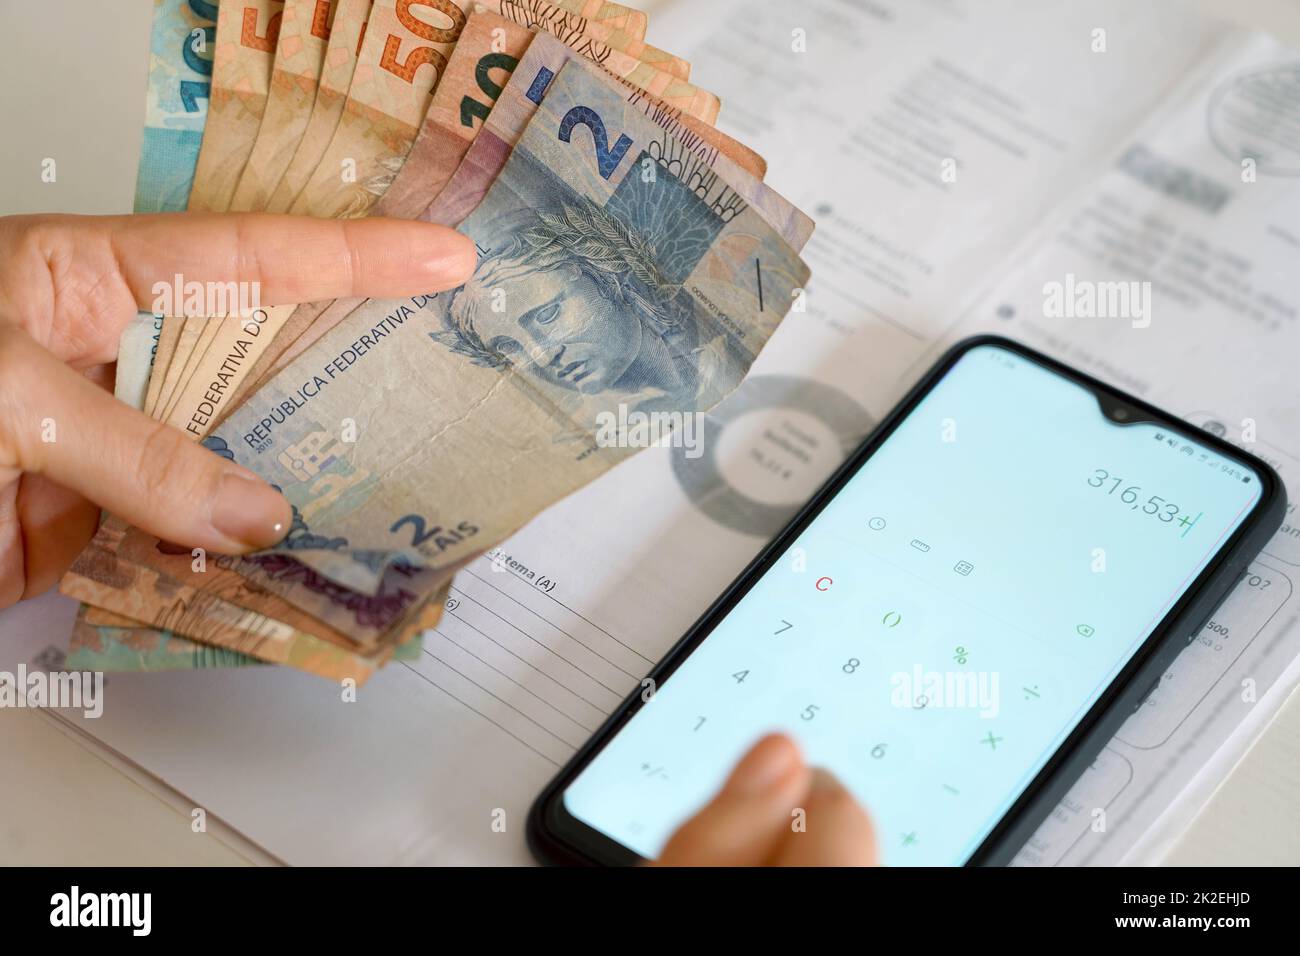 Rising prices of energy bills during financial crisis. Woman holding Real banknotes of Brazil counting expenses electricity bill or gas bill on calculator. Stock Photo